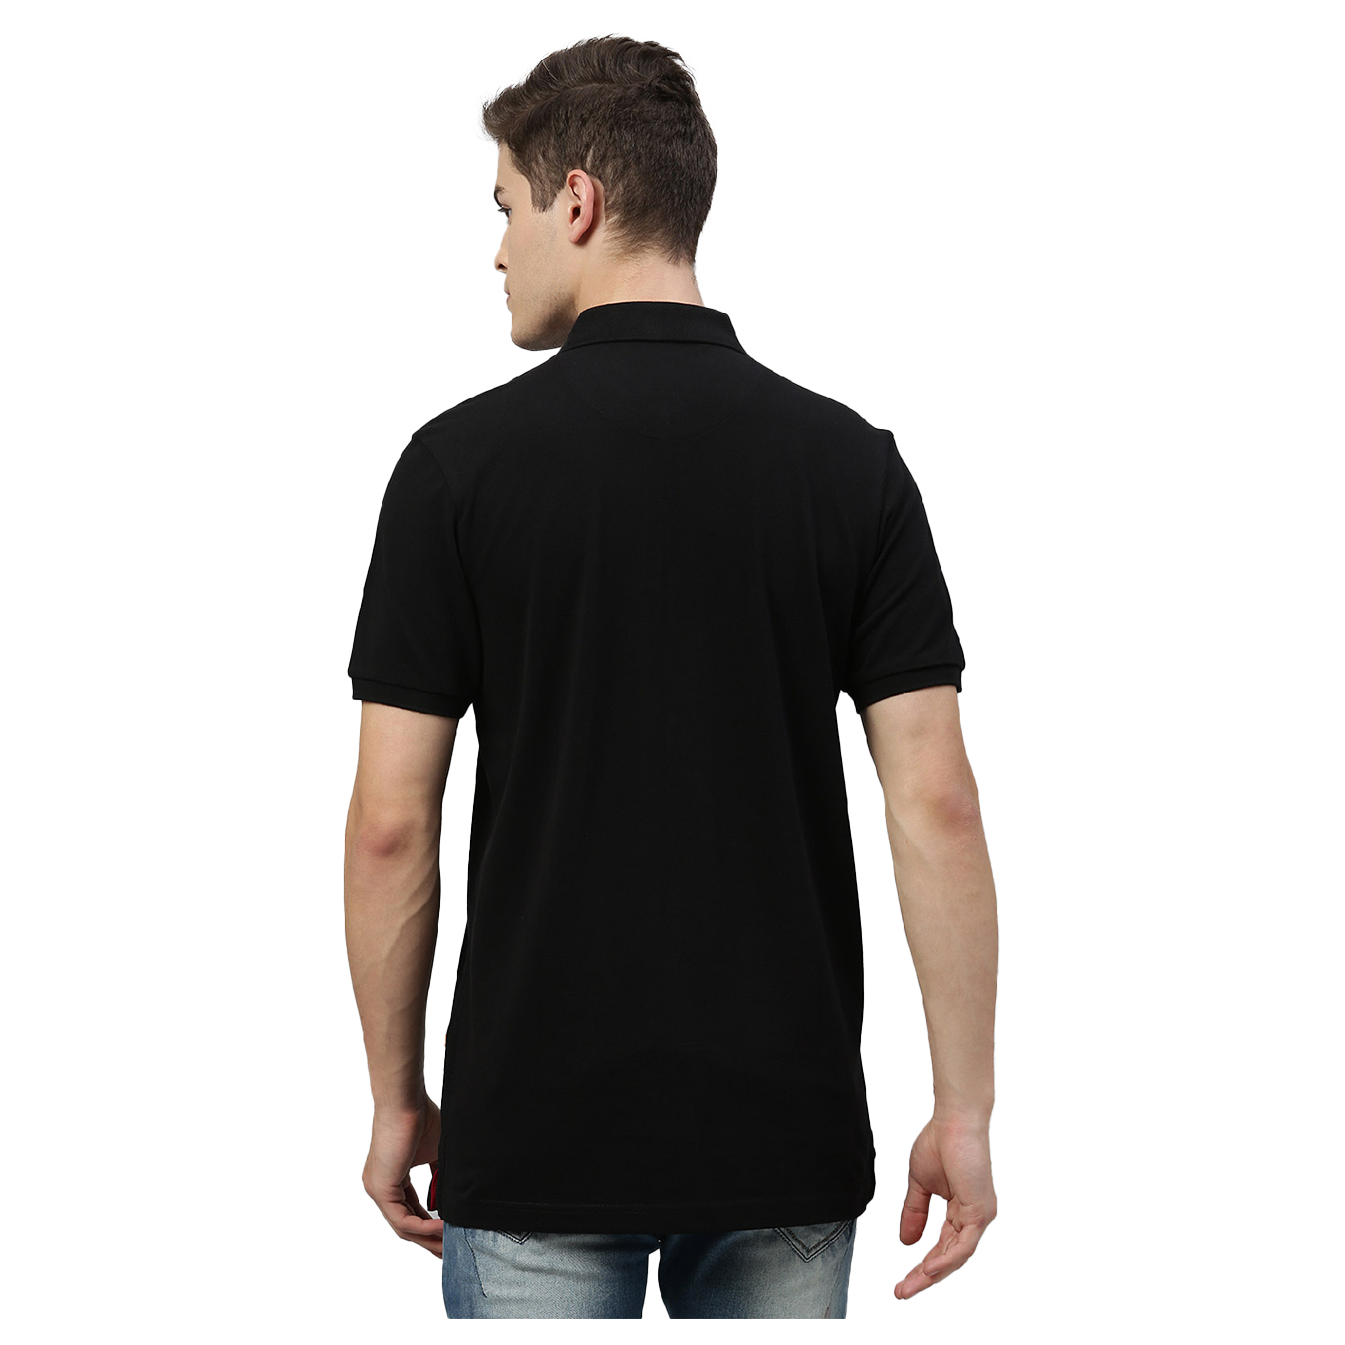 TVS Racing Polo T Shirt Cotton (Black) Online at Best Prices | TVS ...